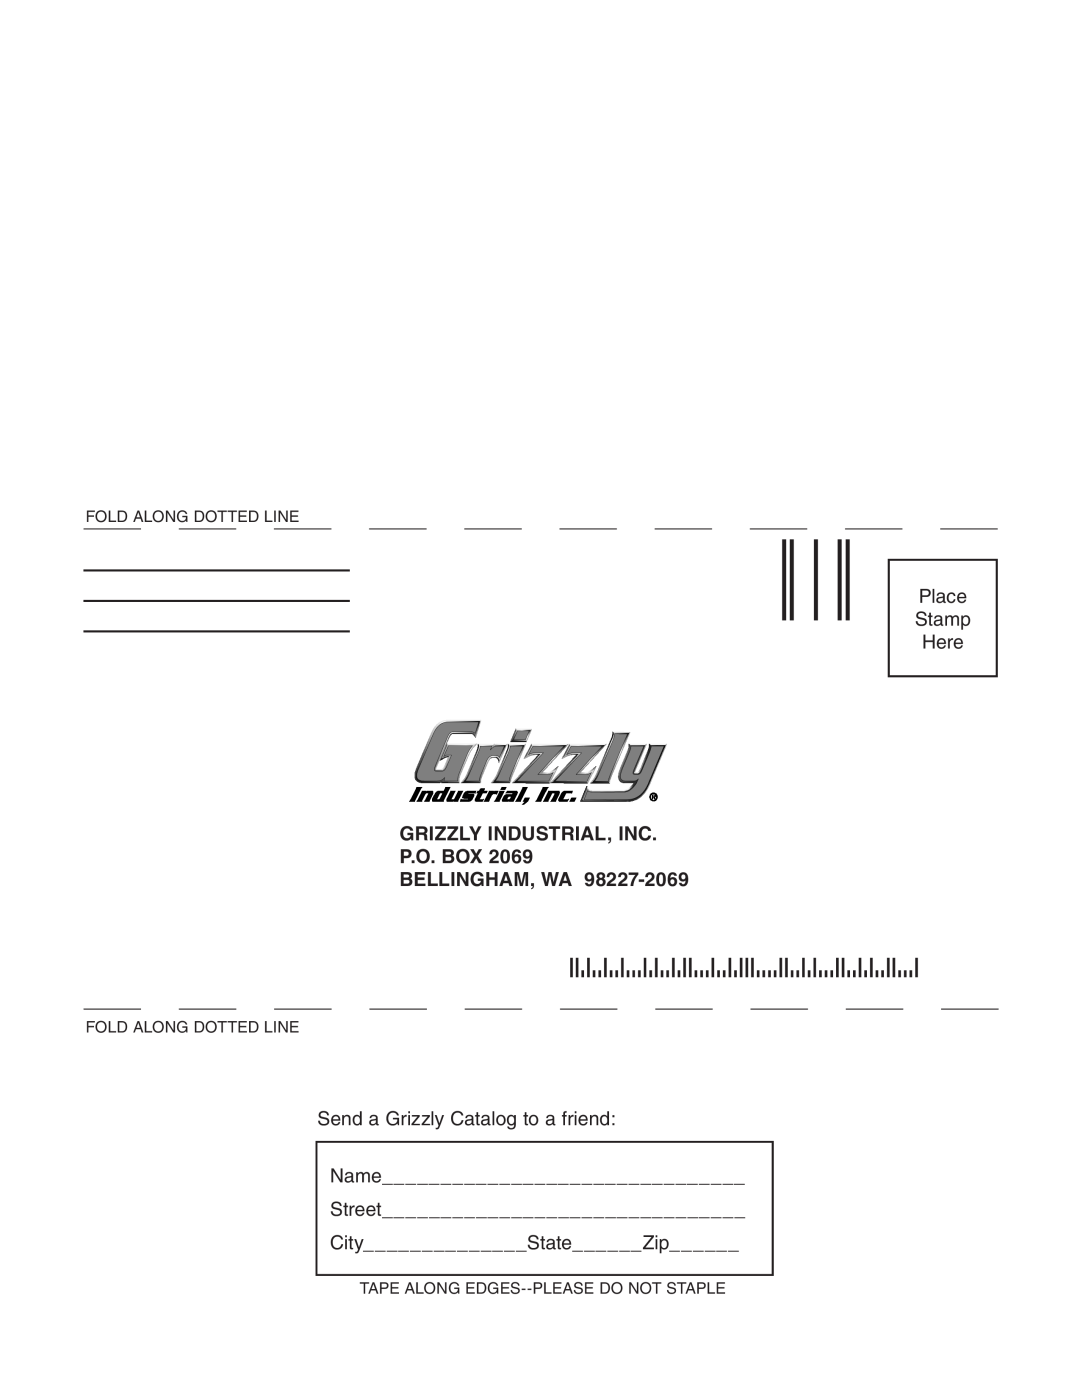 Grizzly G0573 Place Stamp Here, Grizzly Industrial, Inc P.O. Box Bellingham, Wa, Send a Grizzly Catalog to a friend, Name 